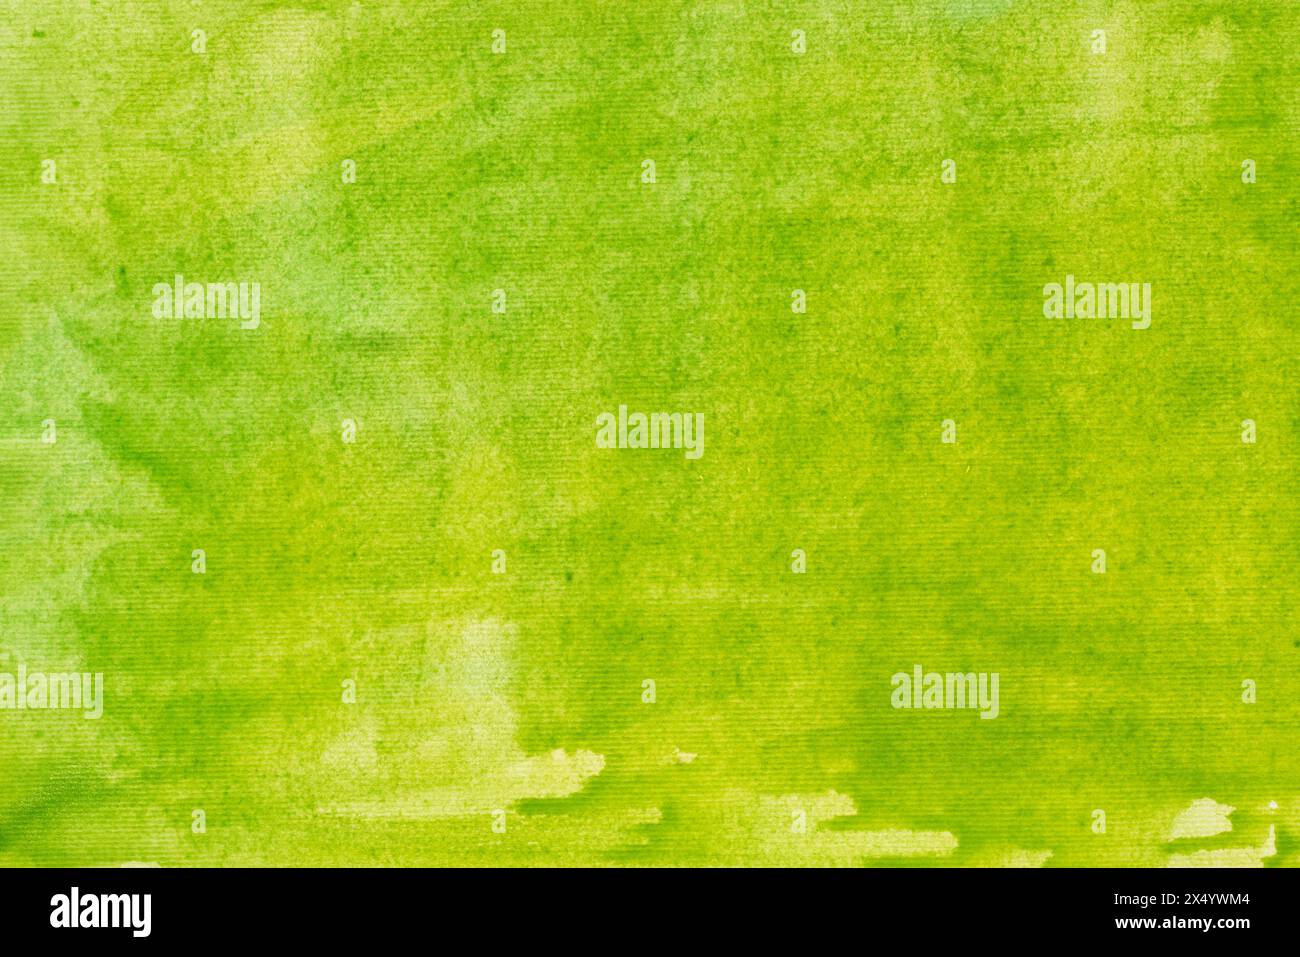 green painted  watercolor background on paper texture Stock Photo